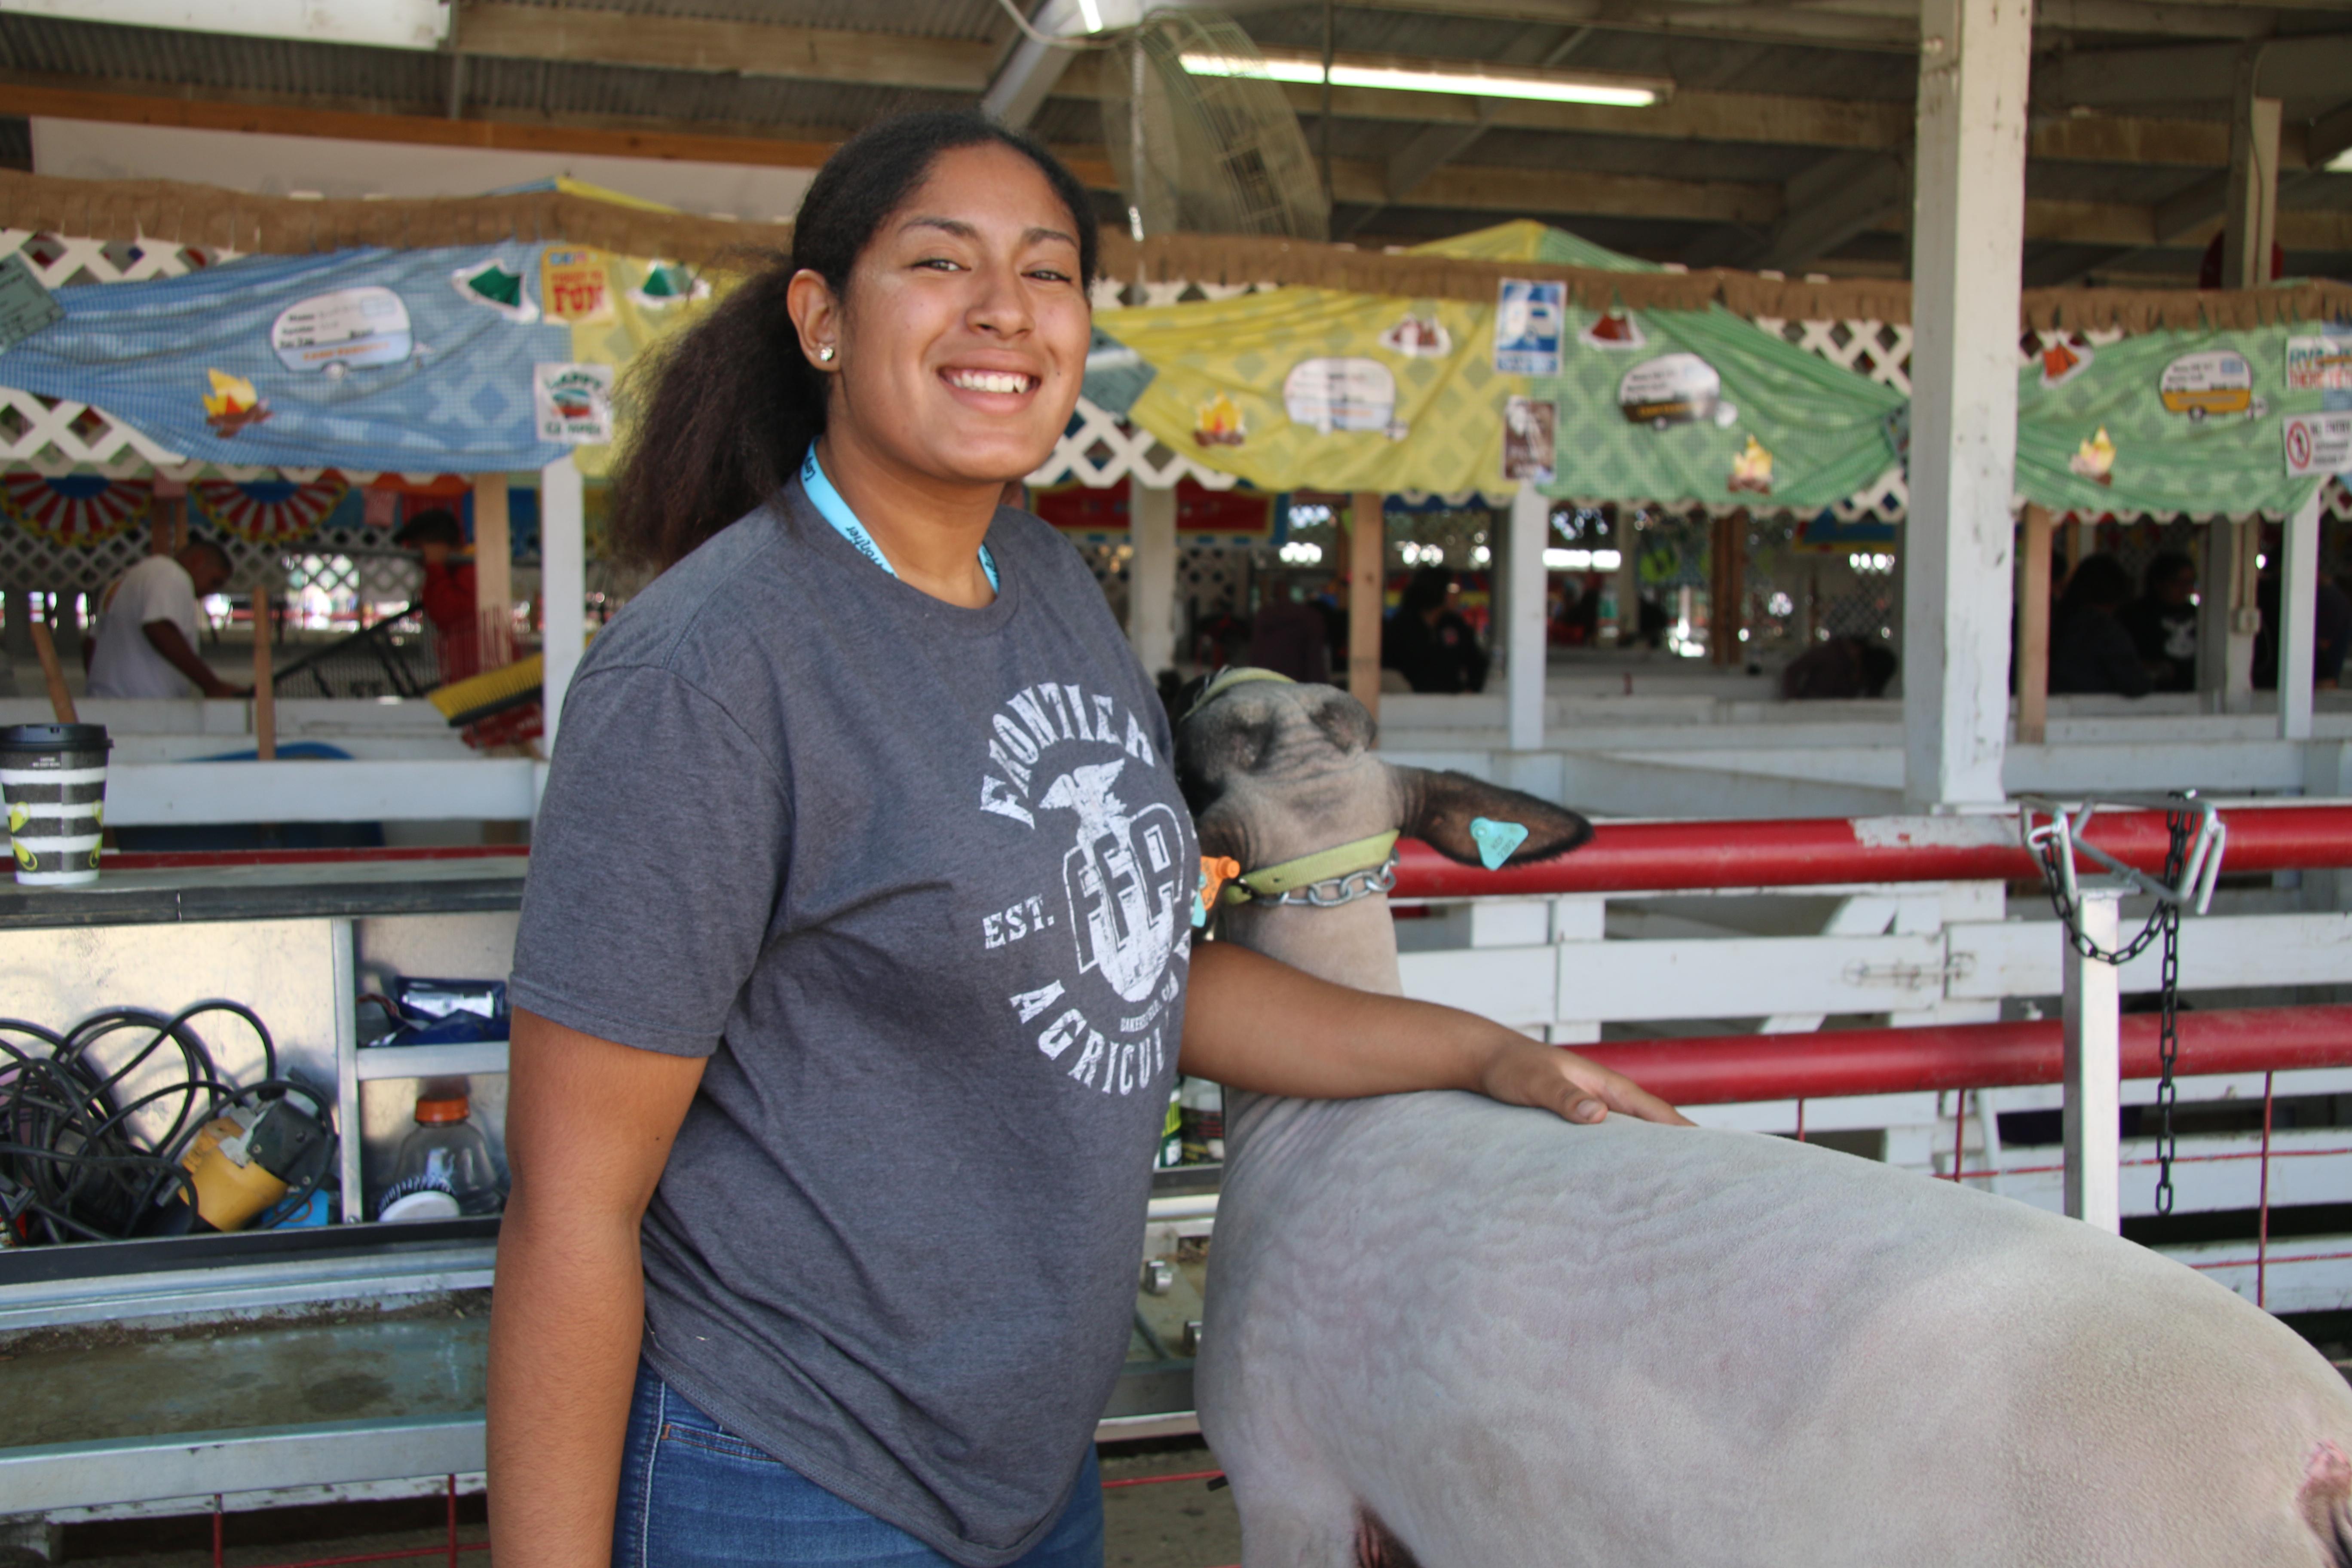 Frontier FFA student with lamb